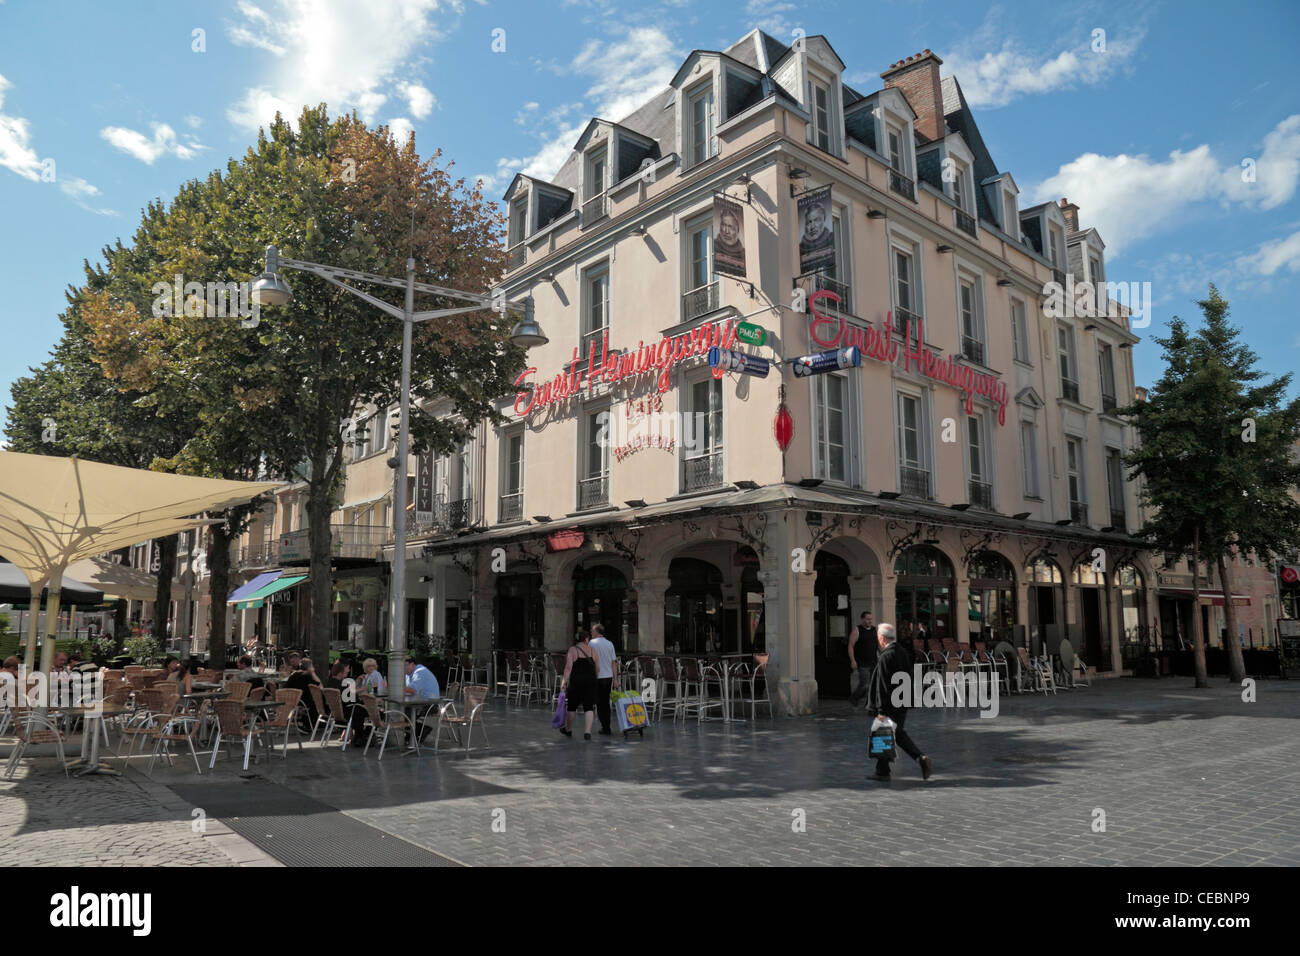 The Ernest Hemingway bar on Place Drouet, Reims, France Stock Photo - Alamy